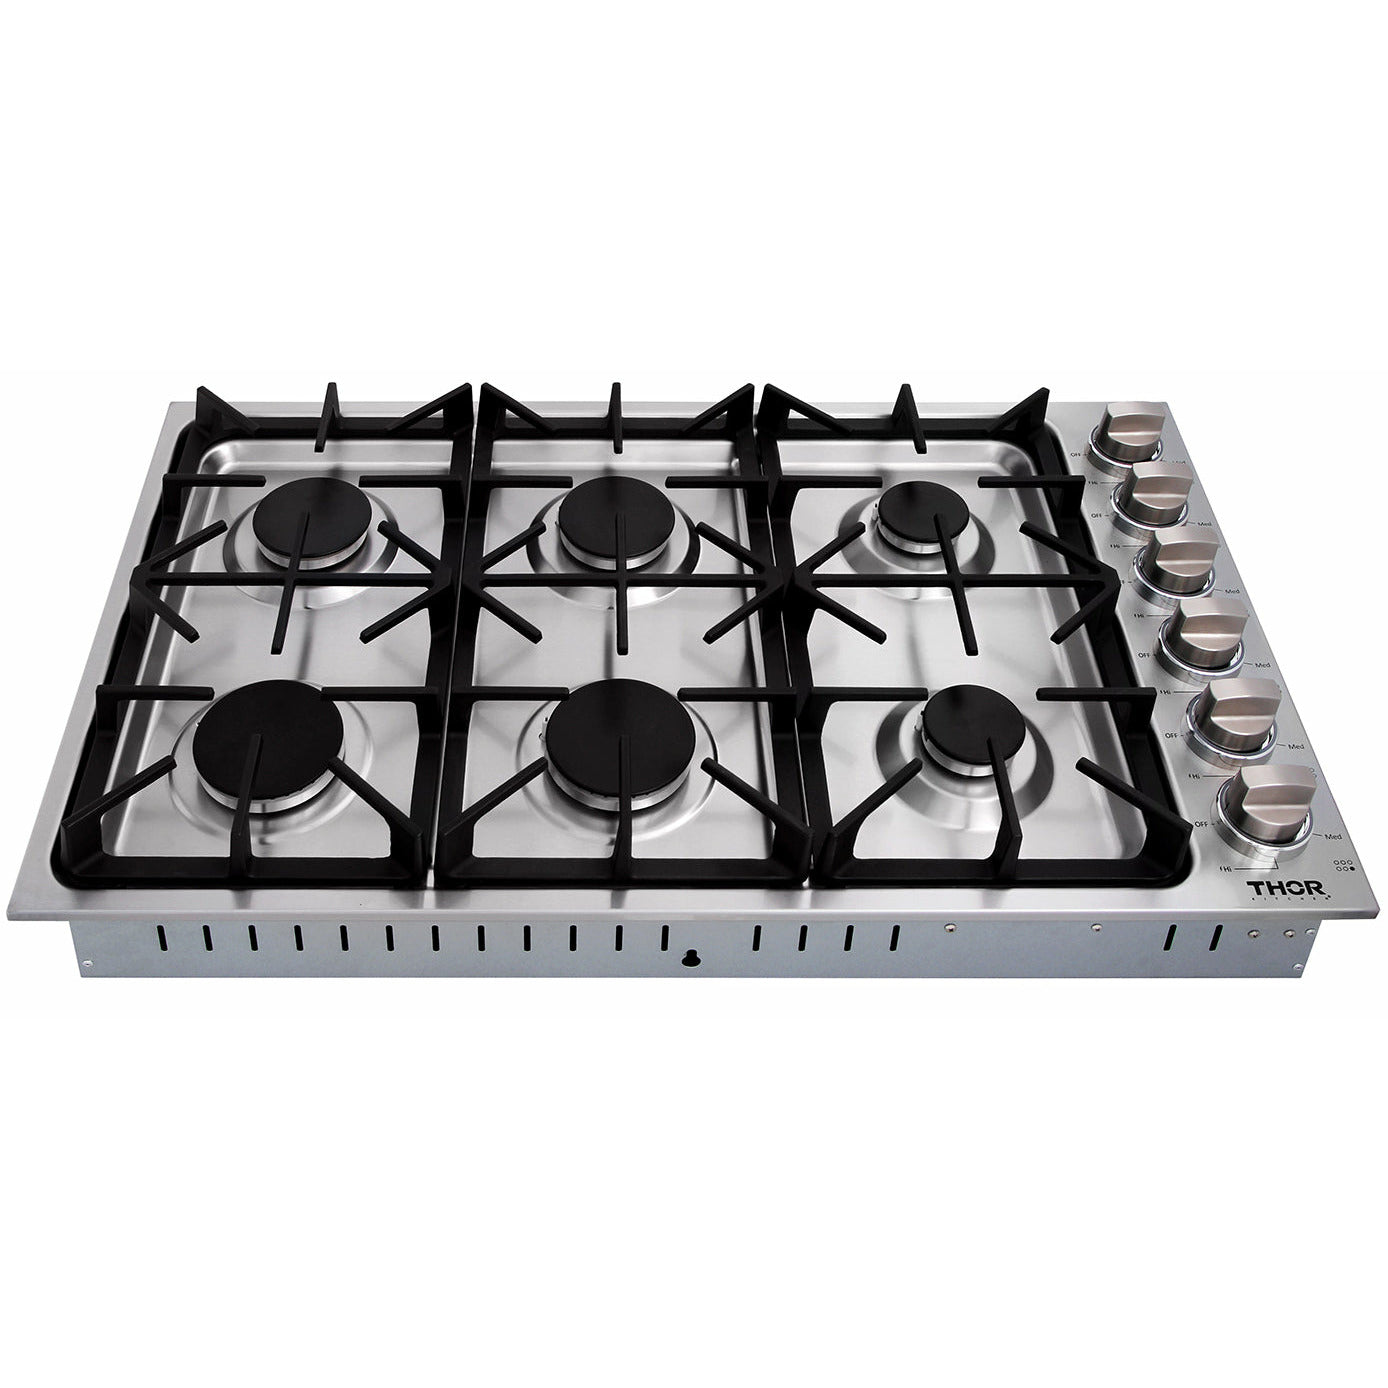 https://thehomeselection.com/cdn/shop/products/TGC3601-thor-kitchen-gas-cooktop3_c7d10275-6a8d-4662-a547-82c7e637cc17.jpg?v=1651844742